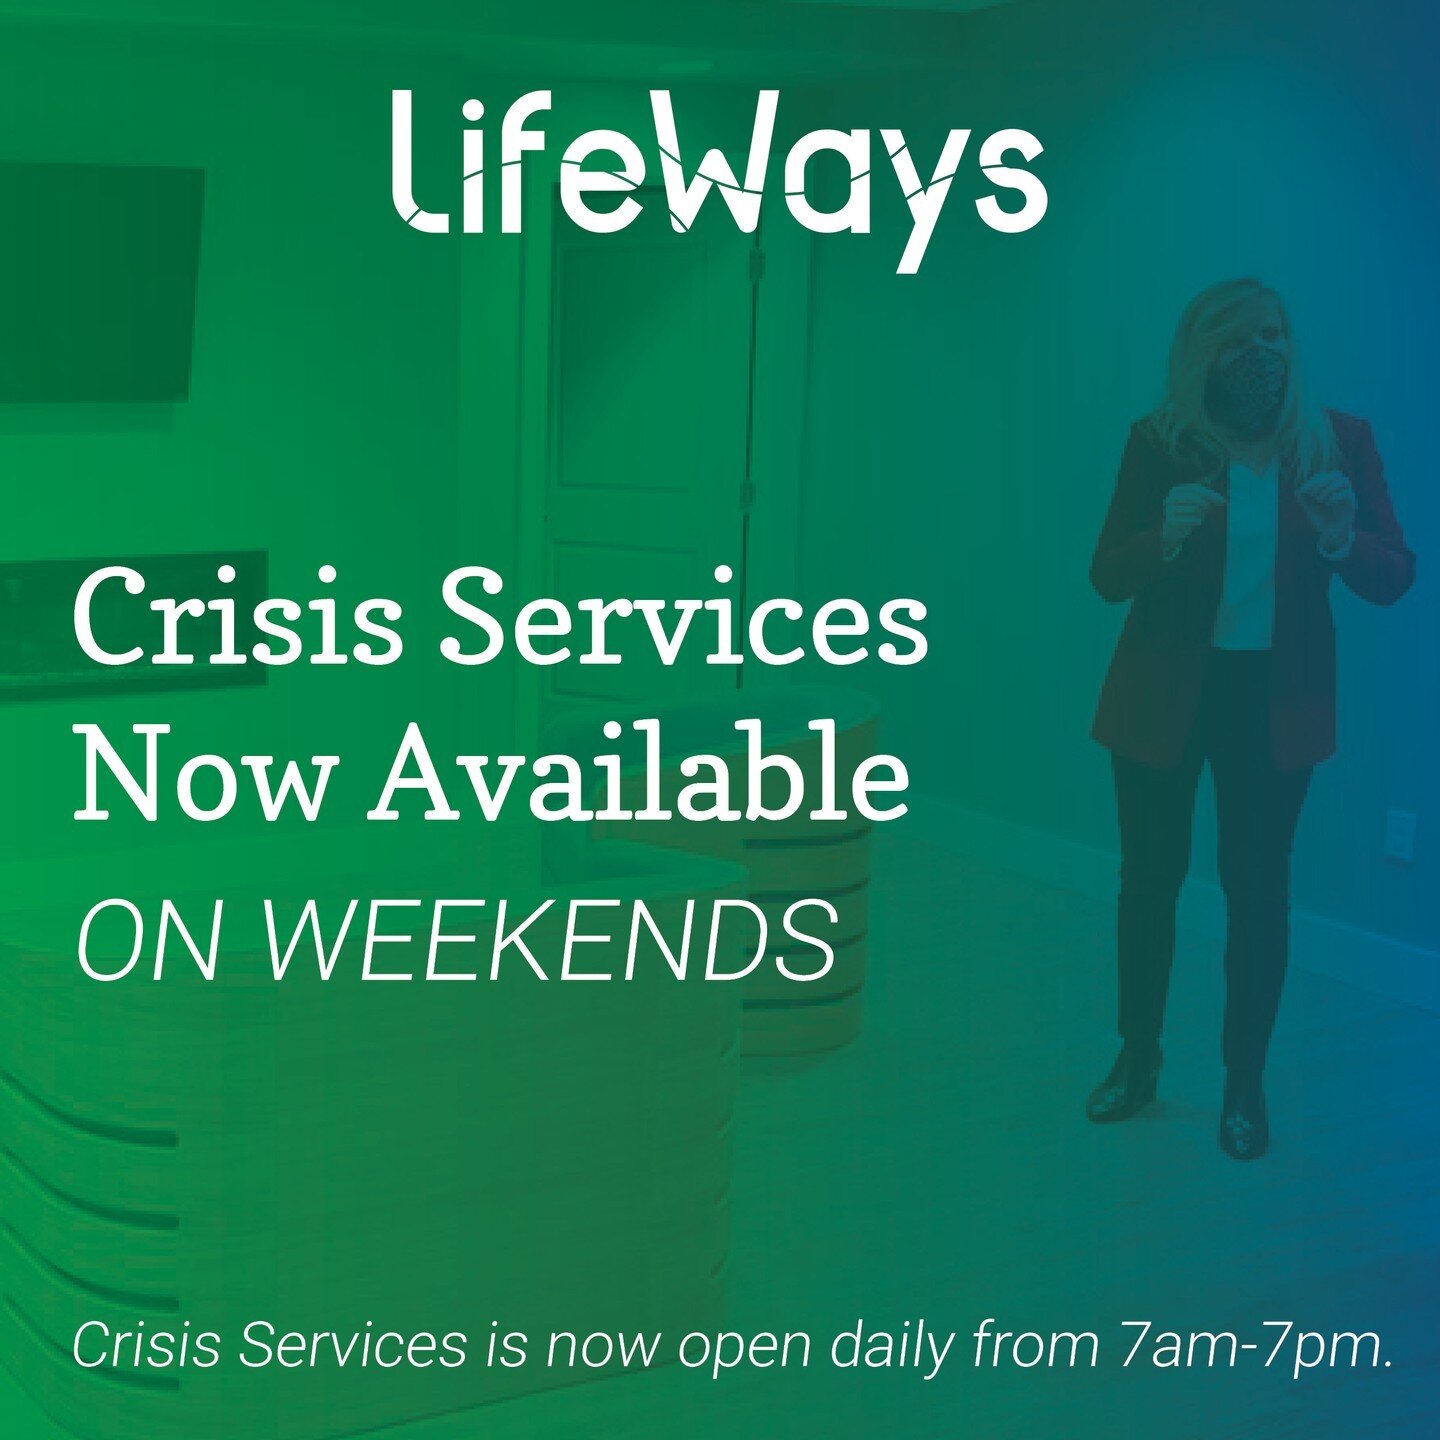 LifeWays Crisis Services Now Available on Weekends!
Learn More: lifewaysmi.org/lifeways-blog